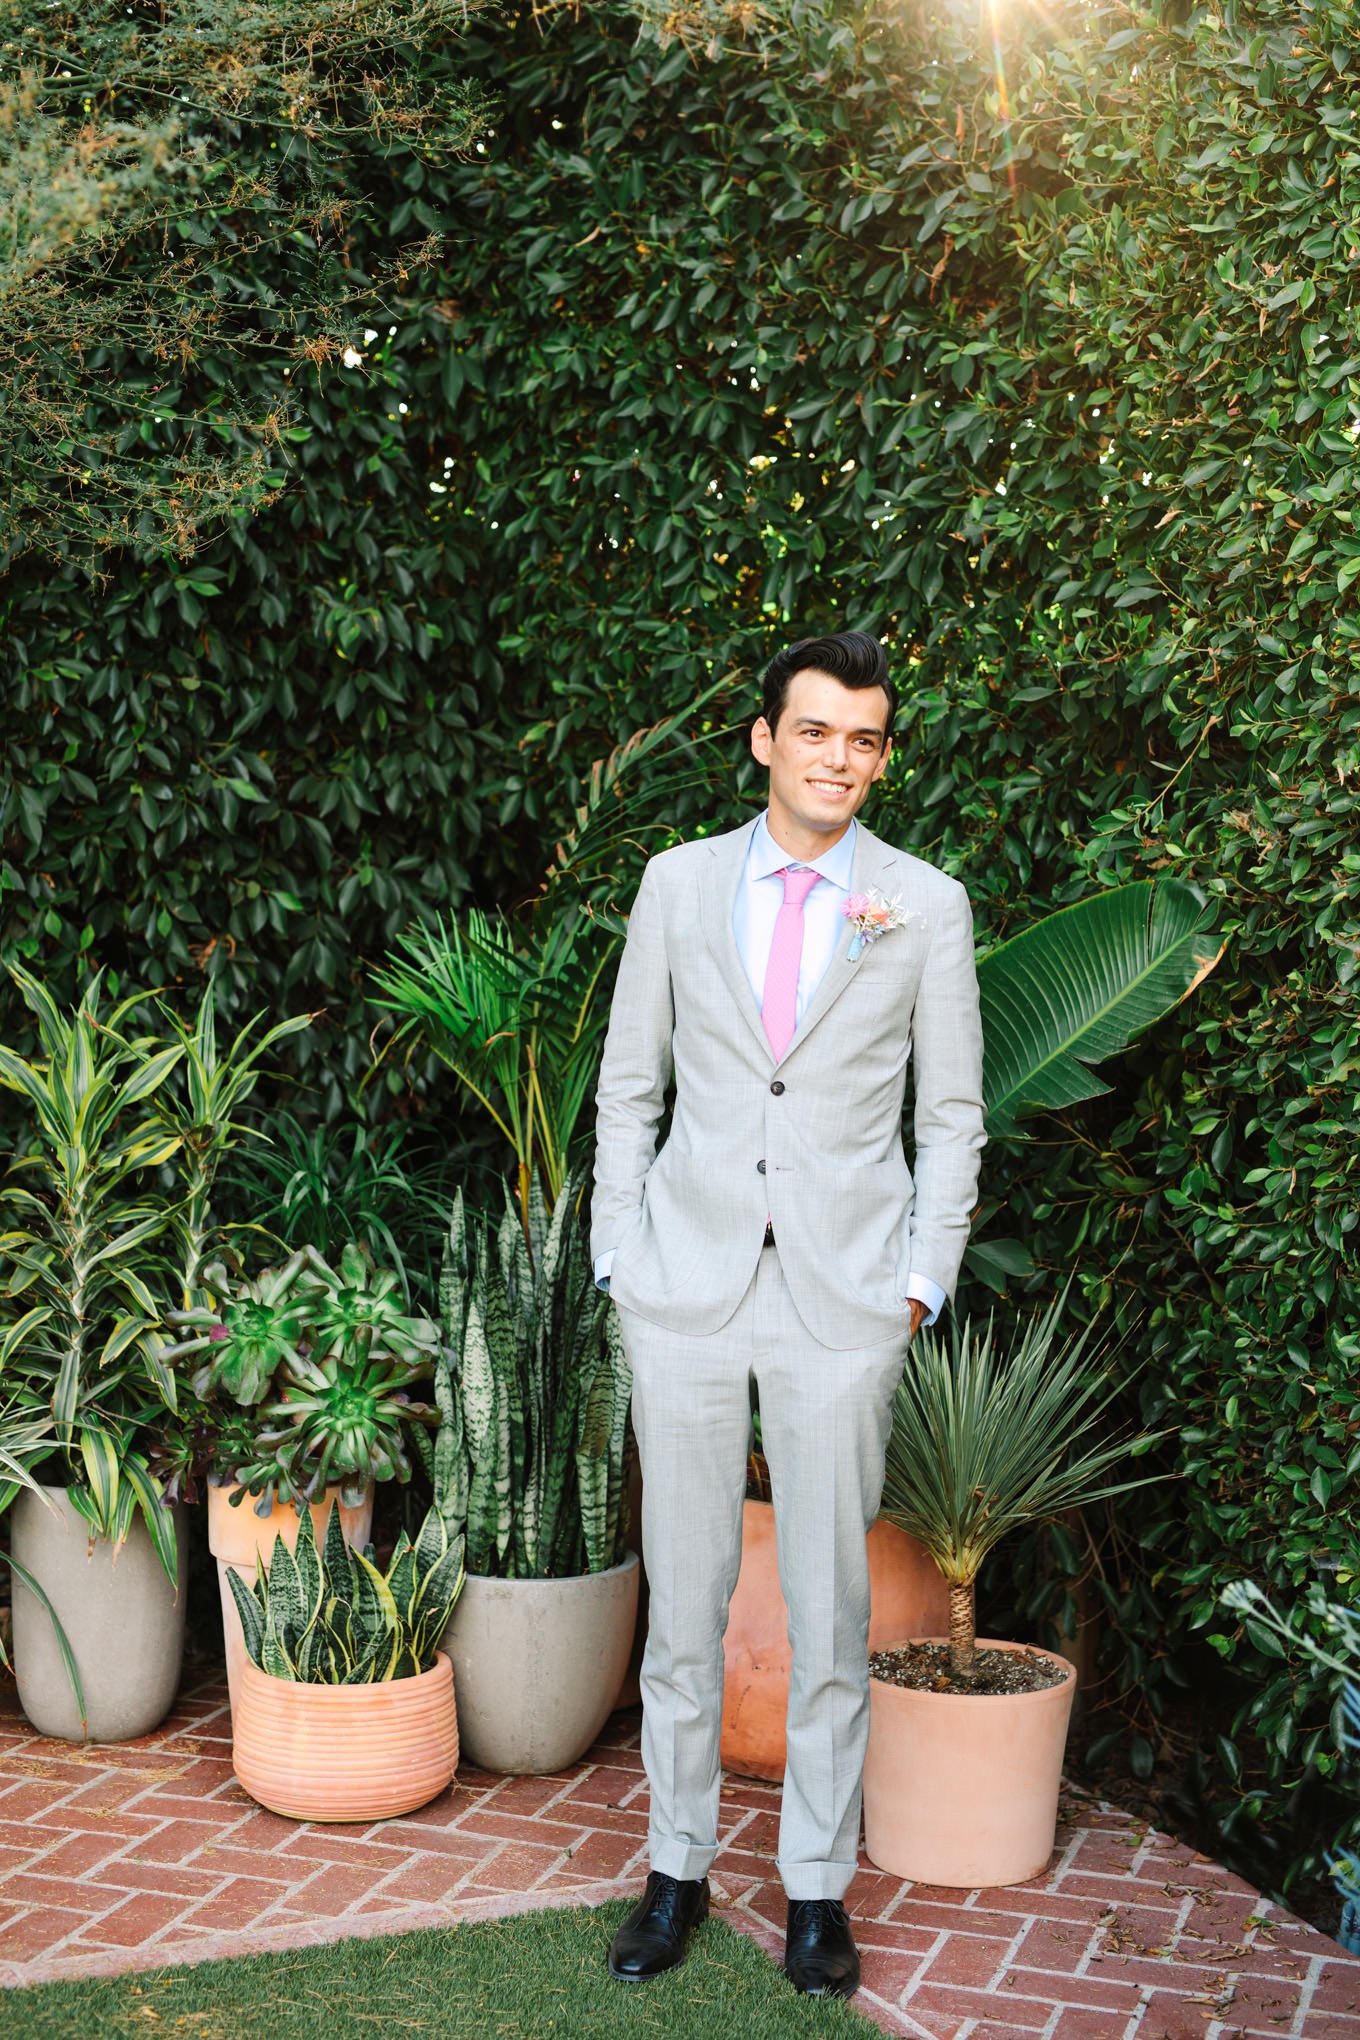 Groom in gray suit with light blue shirt and lavender tie | Colorful pop-up micro wedding at The Ruby Street Los Angeles featured on Green Wedding Shoes | Colorful and elevated photography for fun-loving couples in Southern California | #colorfulwedding #popupwedding #weddingphotography #microwedding Source: Mary Costa Photography | Los Angeles